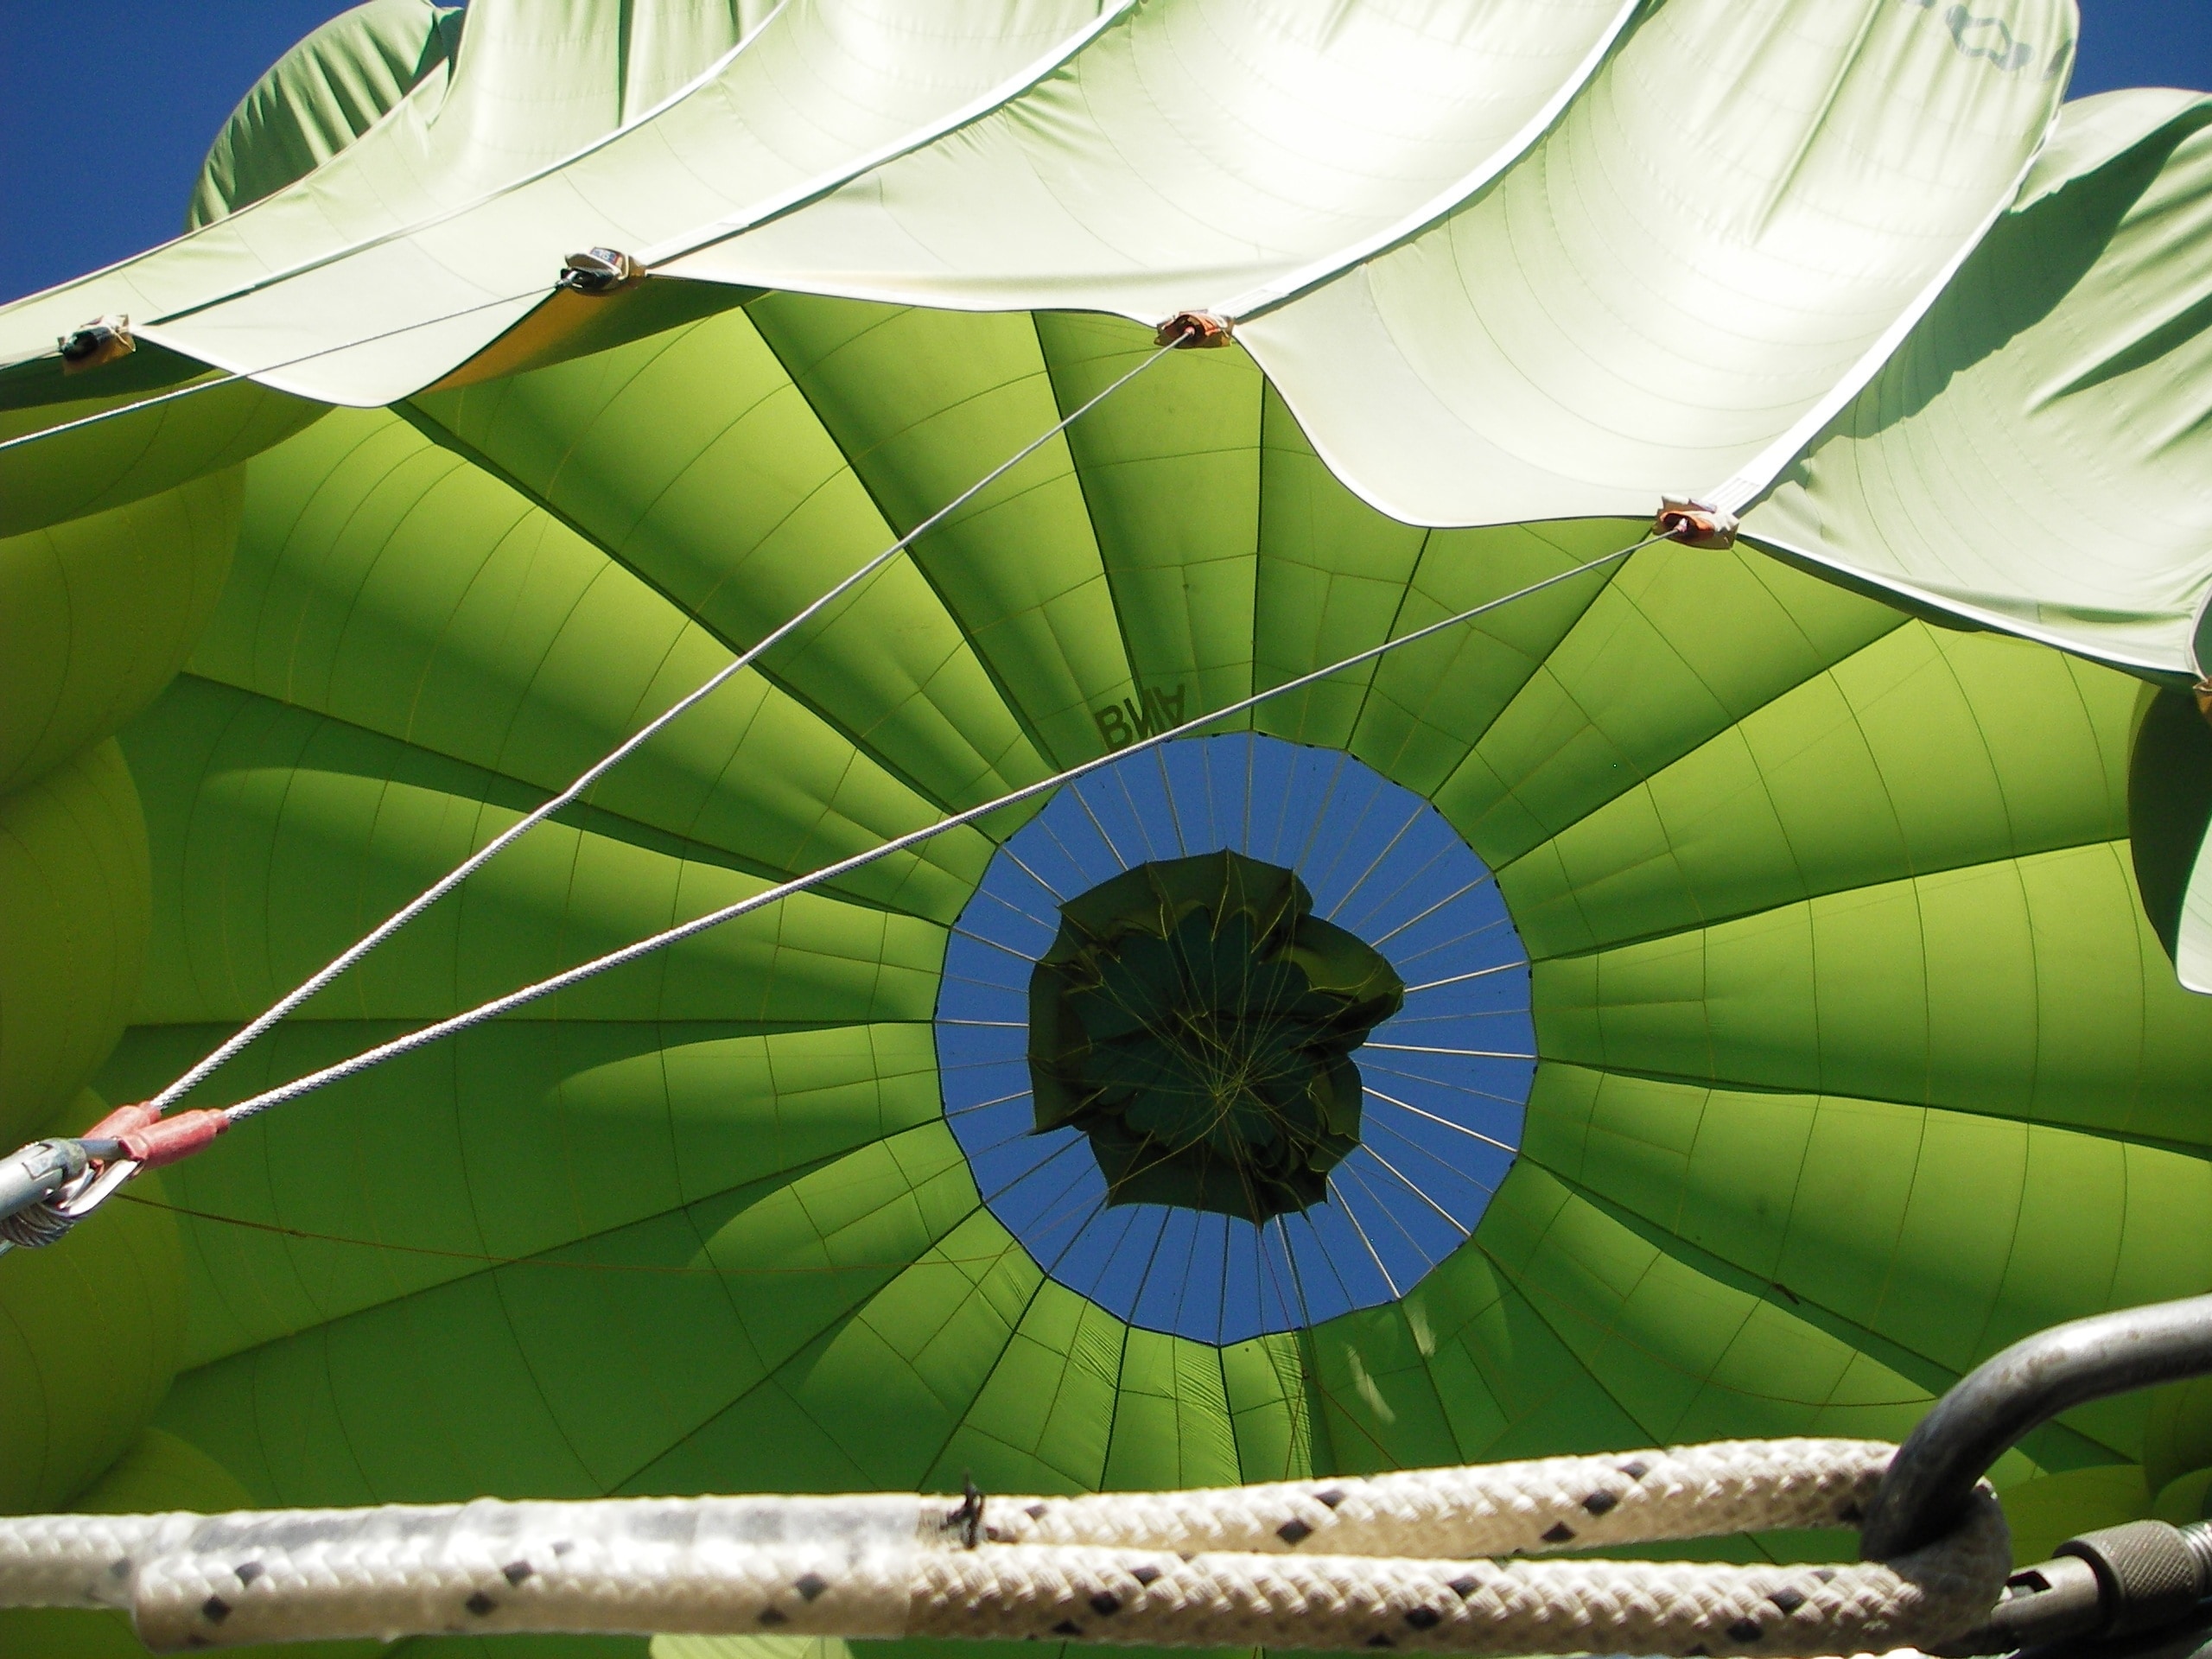 Fly, In The Air, Hot Air Balloon, Flight, green color, leaf